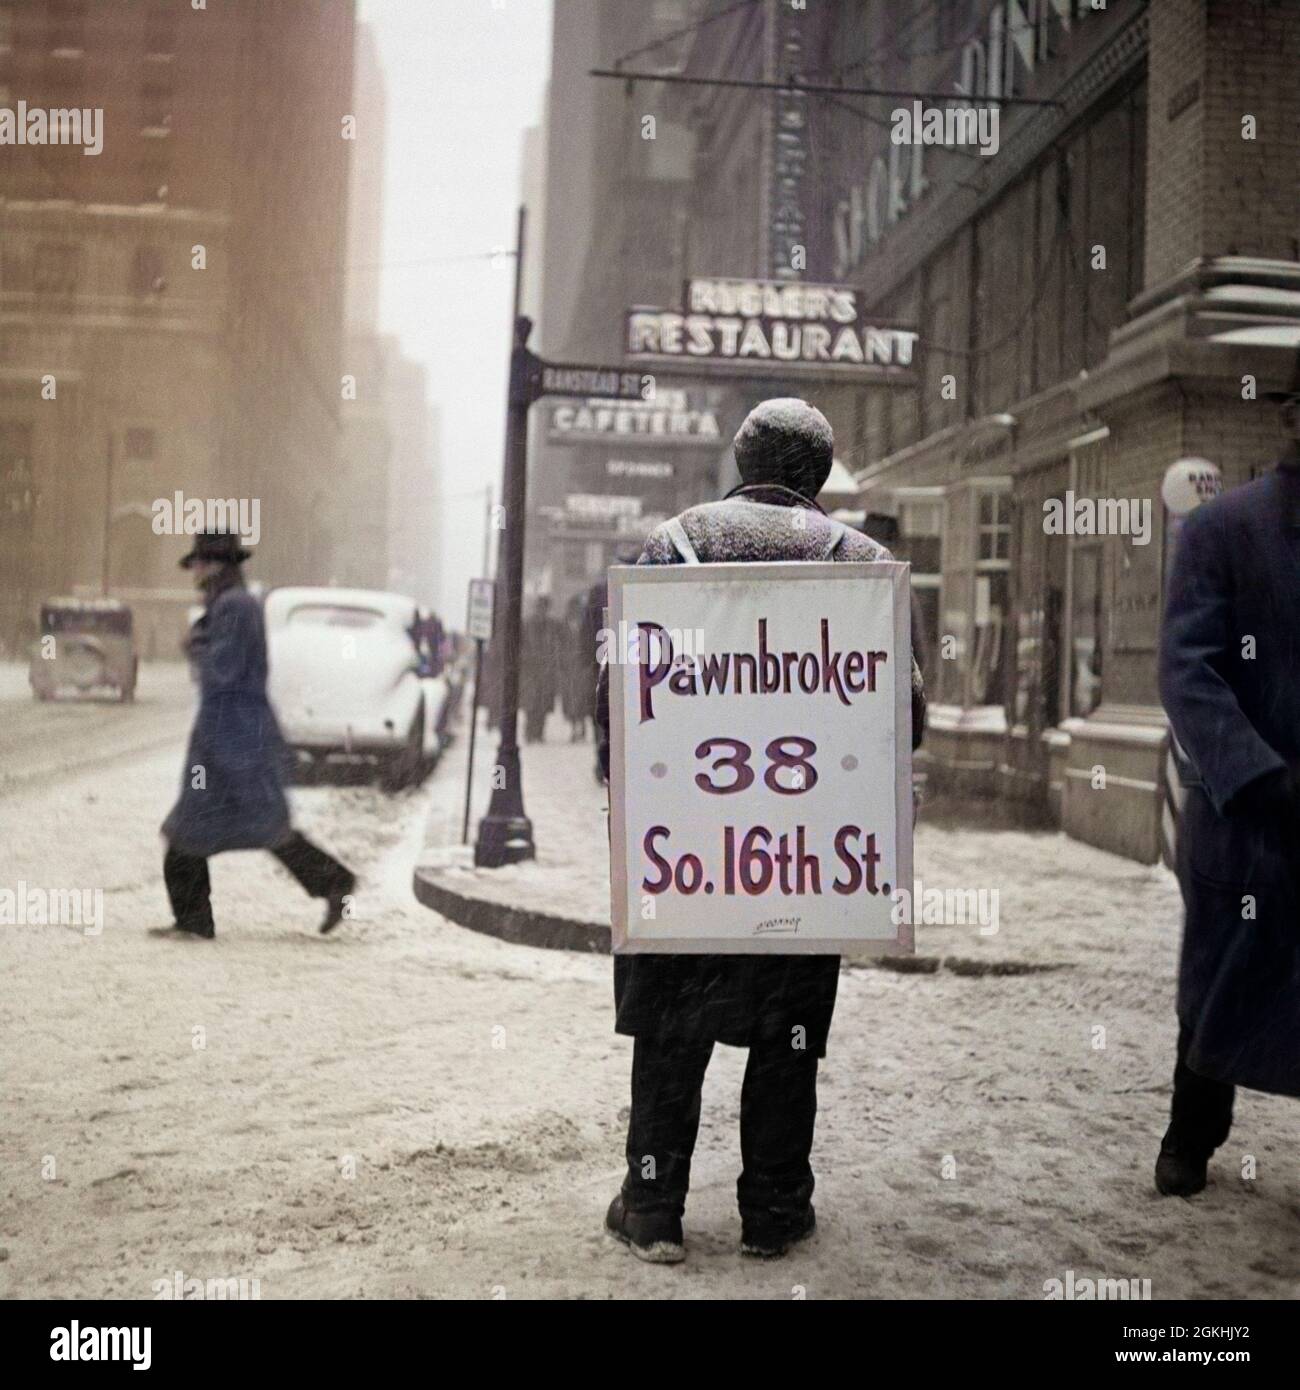 1930s WINTER STREET SCENE OF MAN WEARING PAWNBROKER SANDWICH BOARD - t238c HAR001 HARS OLD TIME FROZEN NOSTALGIA MEDIA OLD FASHION 1 SQUARE COMMUNICATION COOL INFORMATION BILLBOARD JOBS COPY SPACE FULL-LENGTH PERSONS MALES RISK CORNER AMERICANA MAIN PAWNBROKER WINTERTIME DOWNTOWN SKILL MARKETING OCCUPATION SKILLS EXTERIOR EMPLOYMENT OCCUPATIONS STREET CORNER BUSINESS MAN BUSINESS MEN BUSINESS PEOPLE SANDWICH BOARD SMALL BUSINESS BUSINESSPEOPLE DAYTIME FRIGID ADVERTISER ADVERTISE ICY BAD WEATHER DAYLIGHT FOUL WEATHER MERCHANDISE MID-ADULT MID-ADULT MAN PHILLY SEASON SOLUTIONS HAR001 MAIN STREET Stock Photo